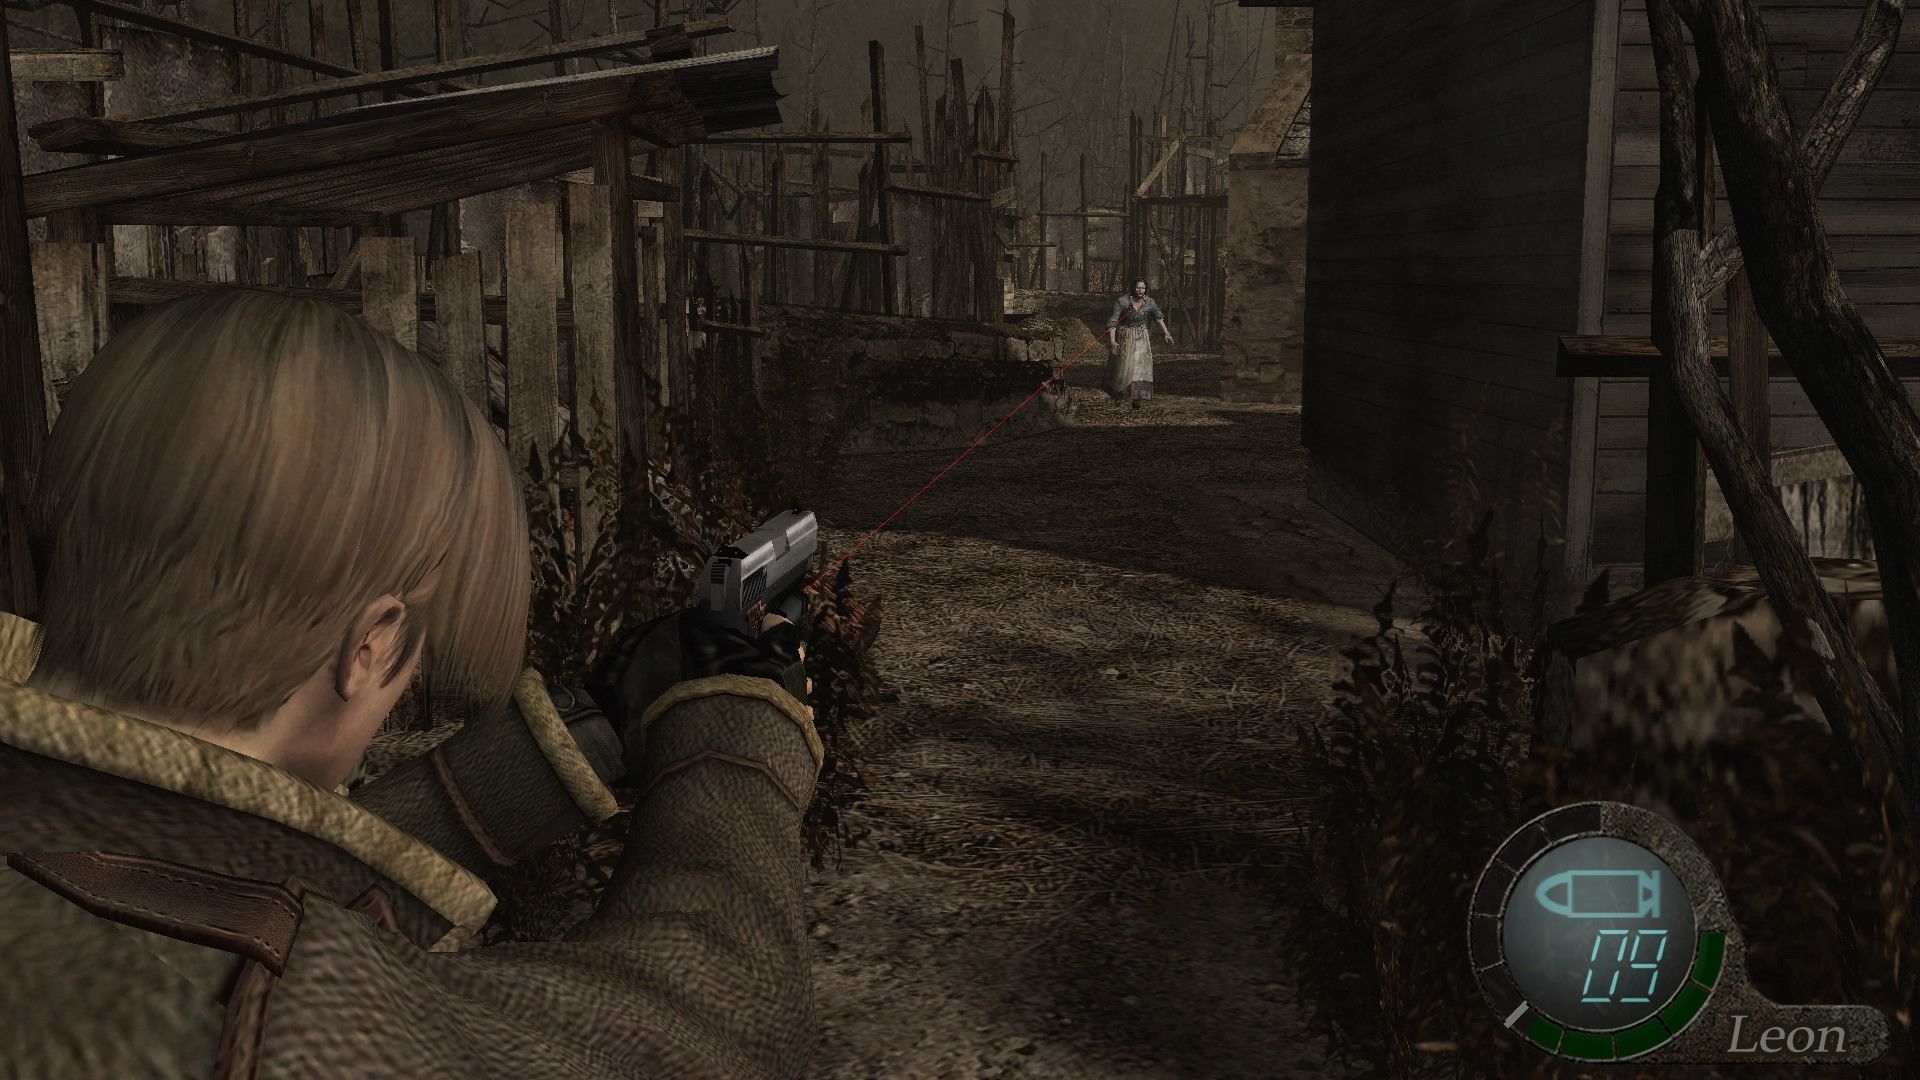 Steam resident evil 4 ultimate hd фото 25